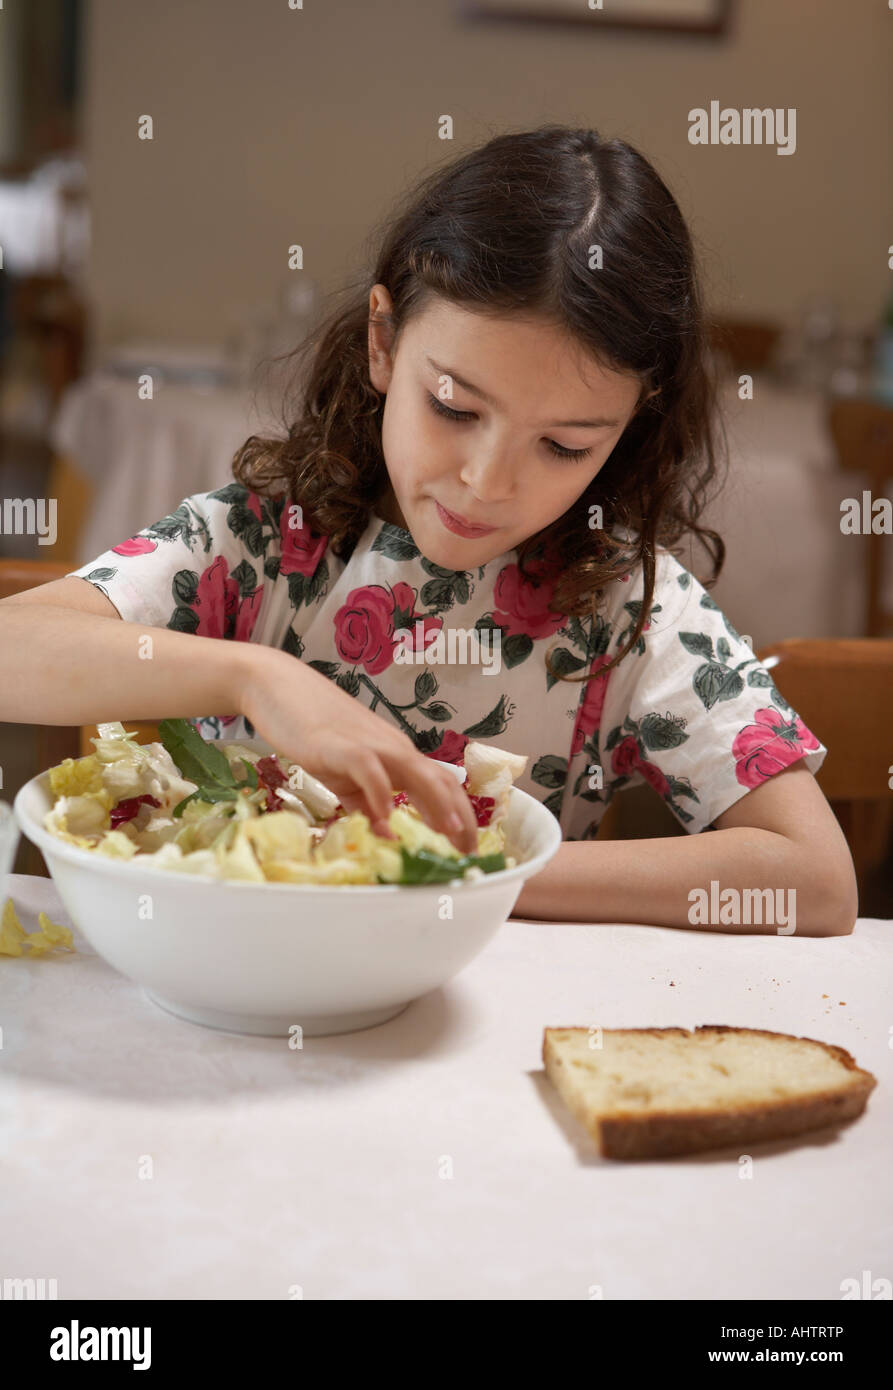 Girl (5-7) eating salad from bowl at a table Stock Photo